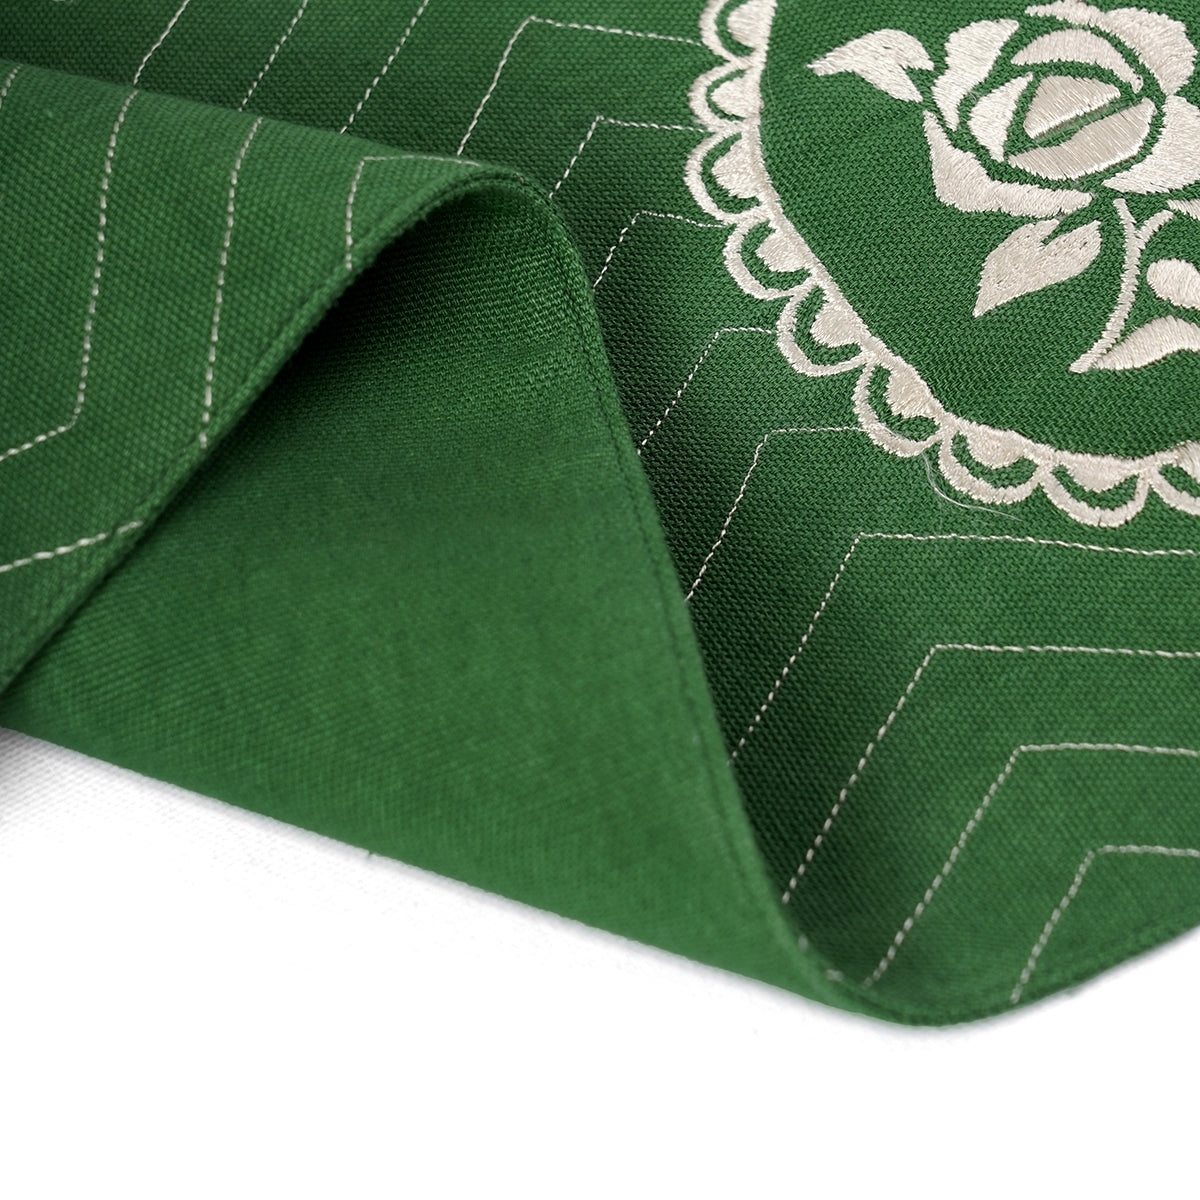 Green cotton Placemat with chevron and vintage rose motif embroidery, 13X19 inches